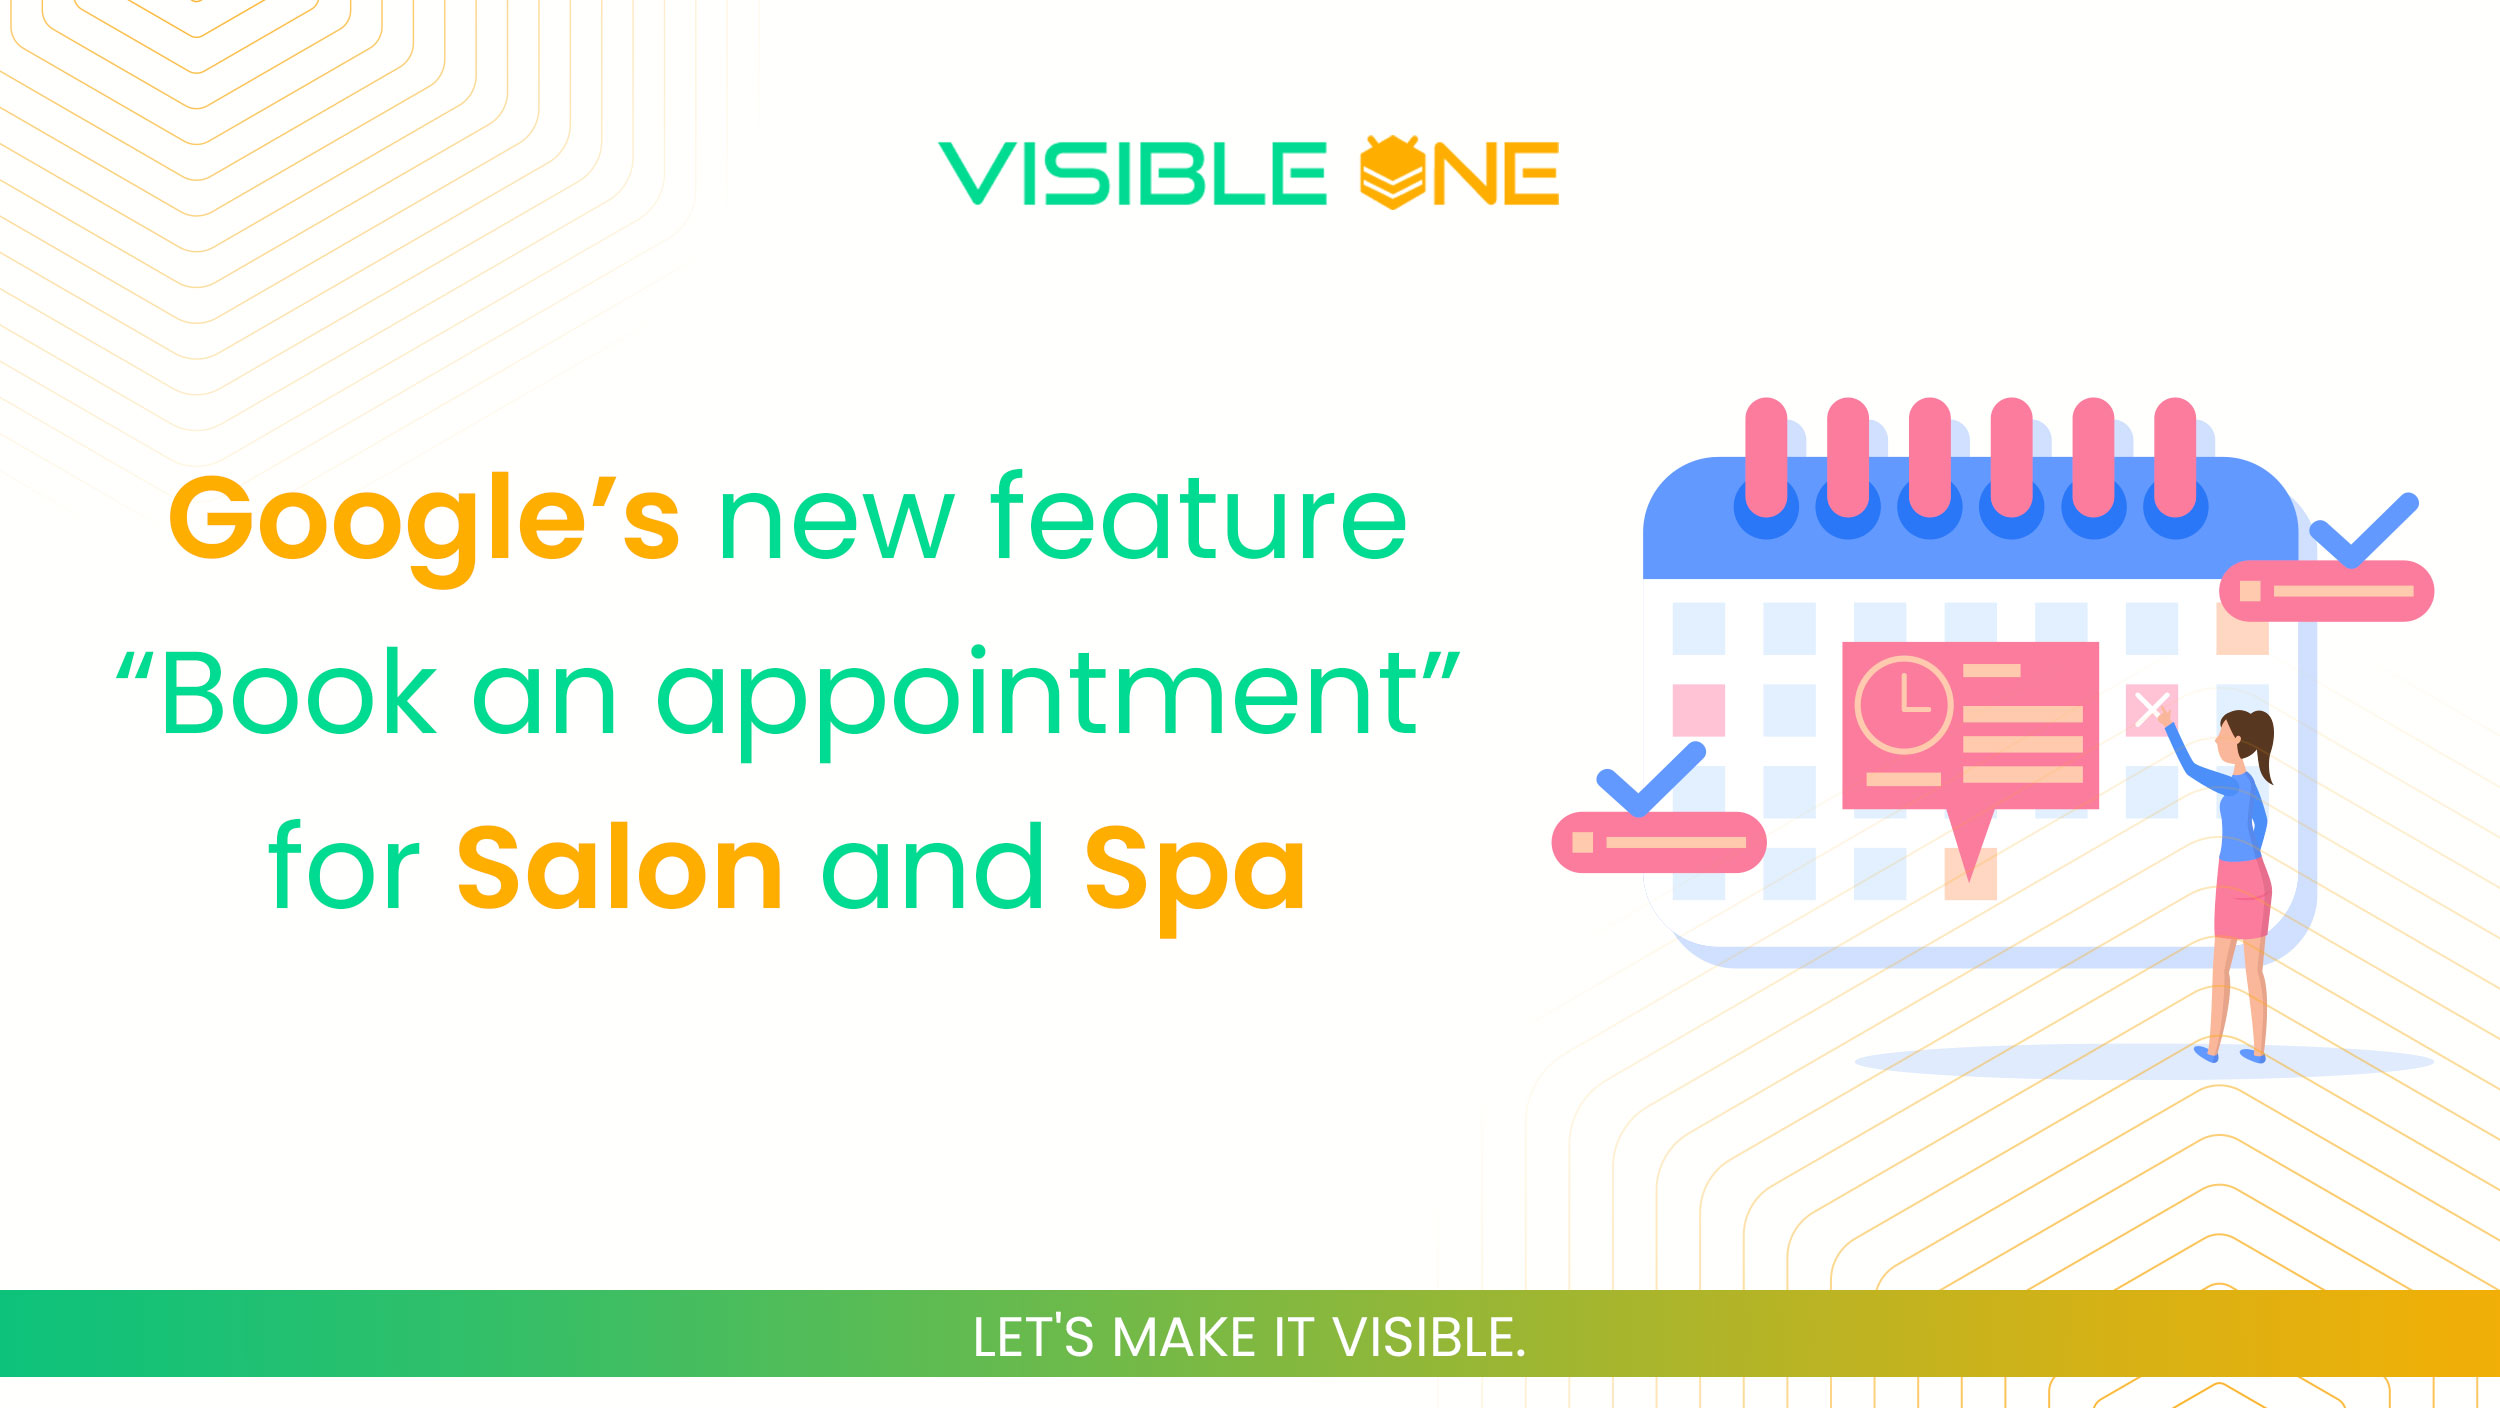 Google’s new feature – “Book an appointment” for Salon and Spa